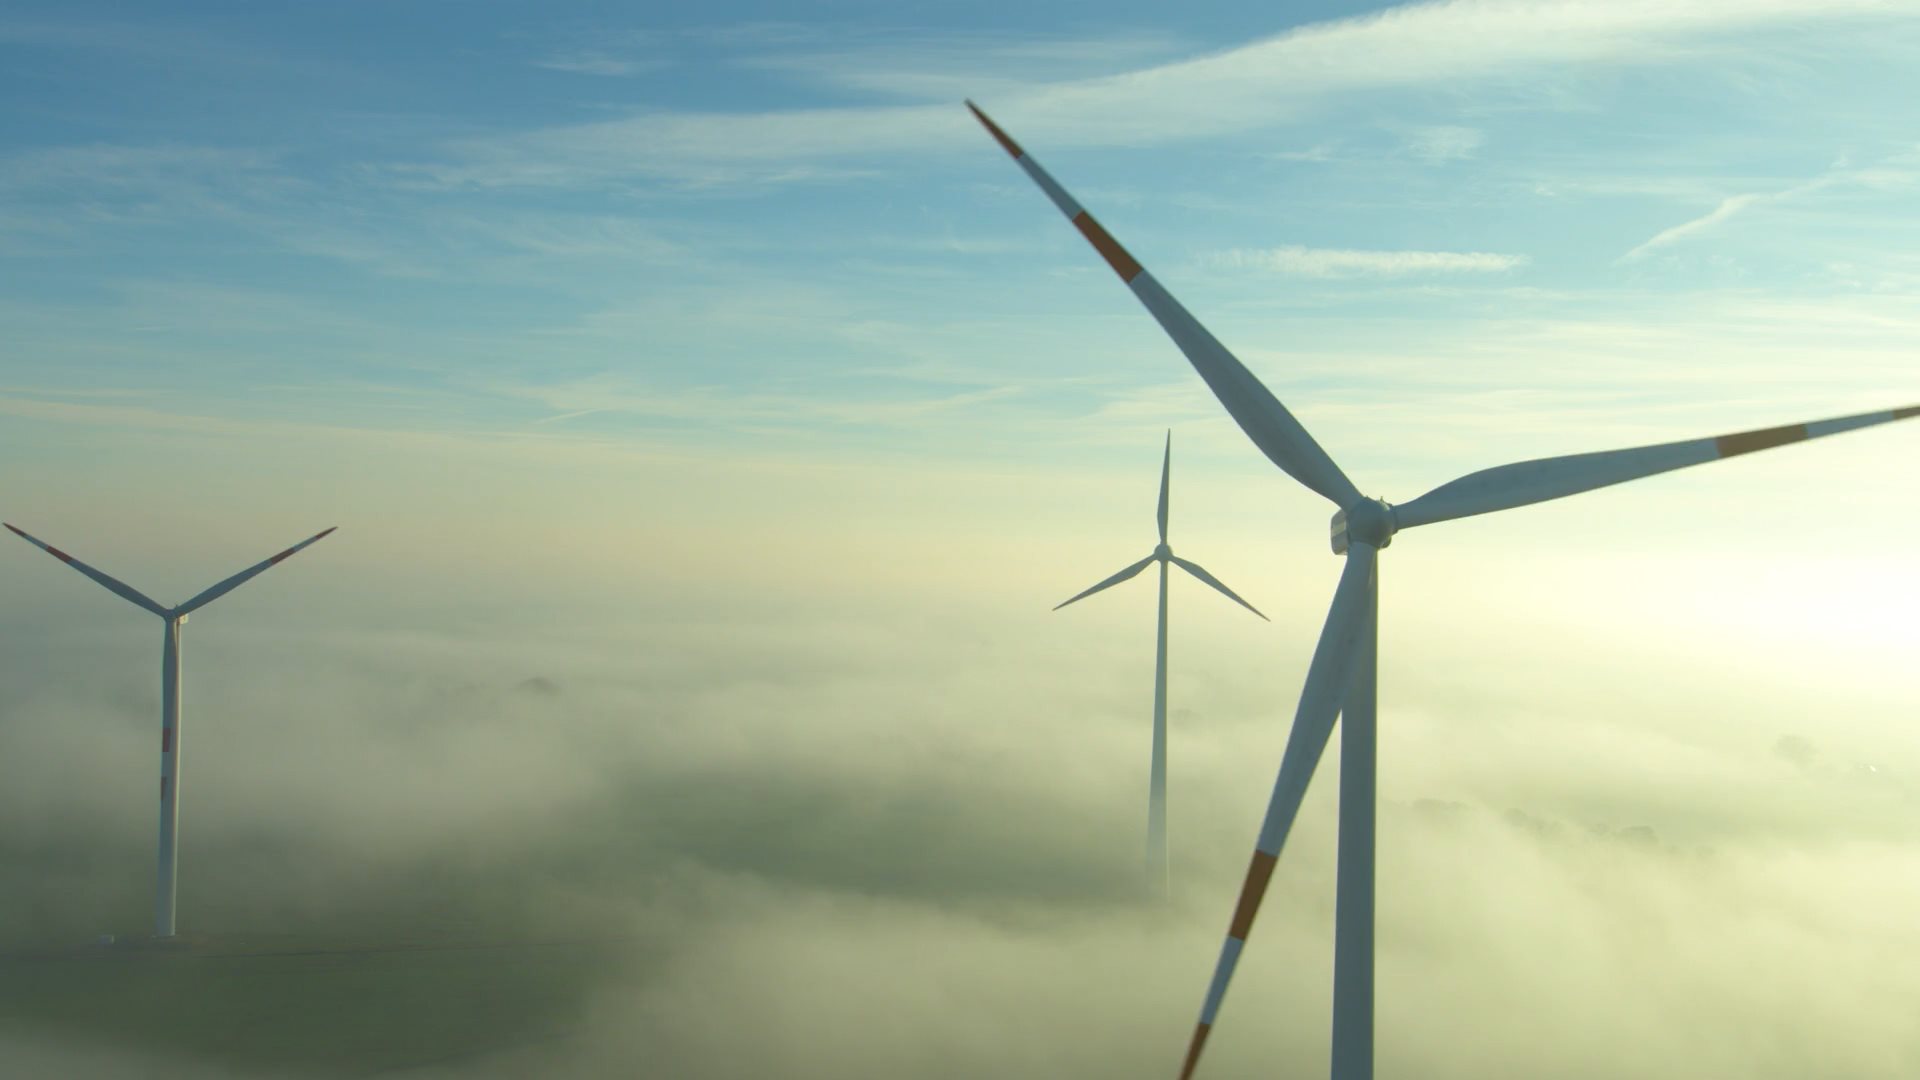 Video of wind turbines spinning in the fog